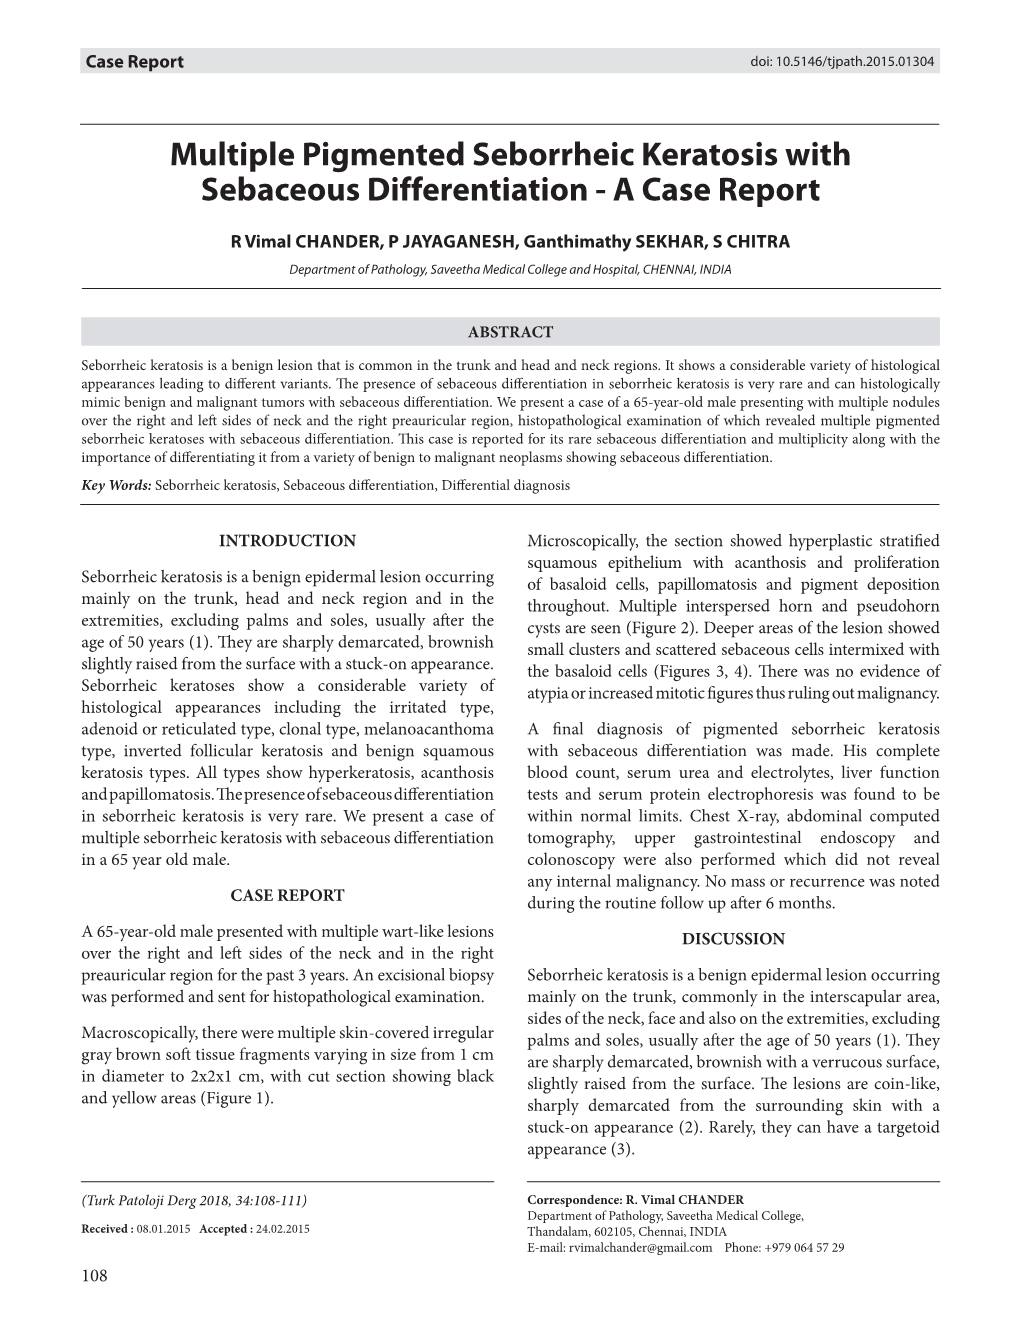 Multiple Pigmented Seborrheic Keratosis with Sebaceous Differentiation - a Case Report